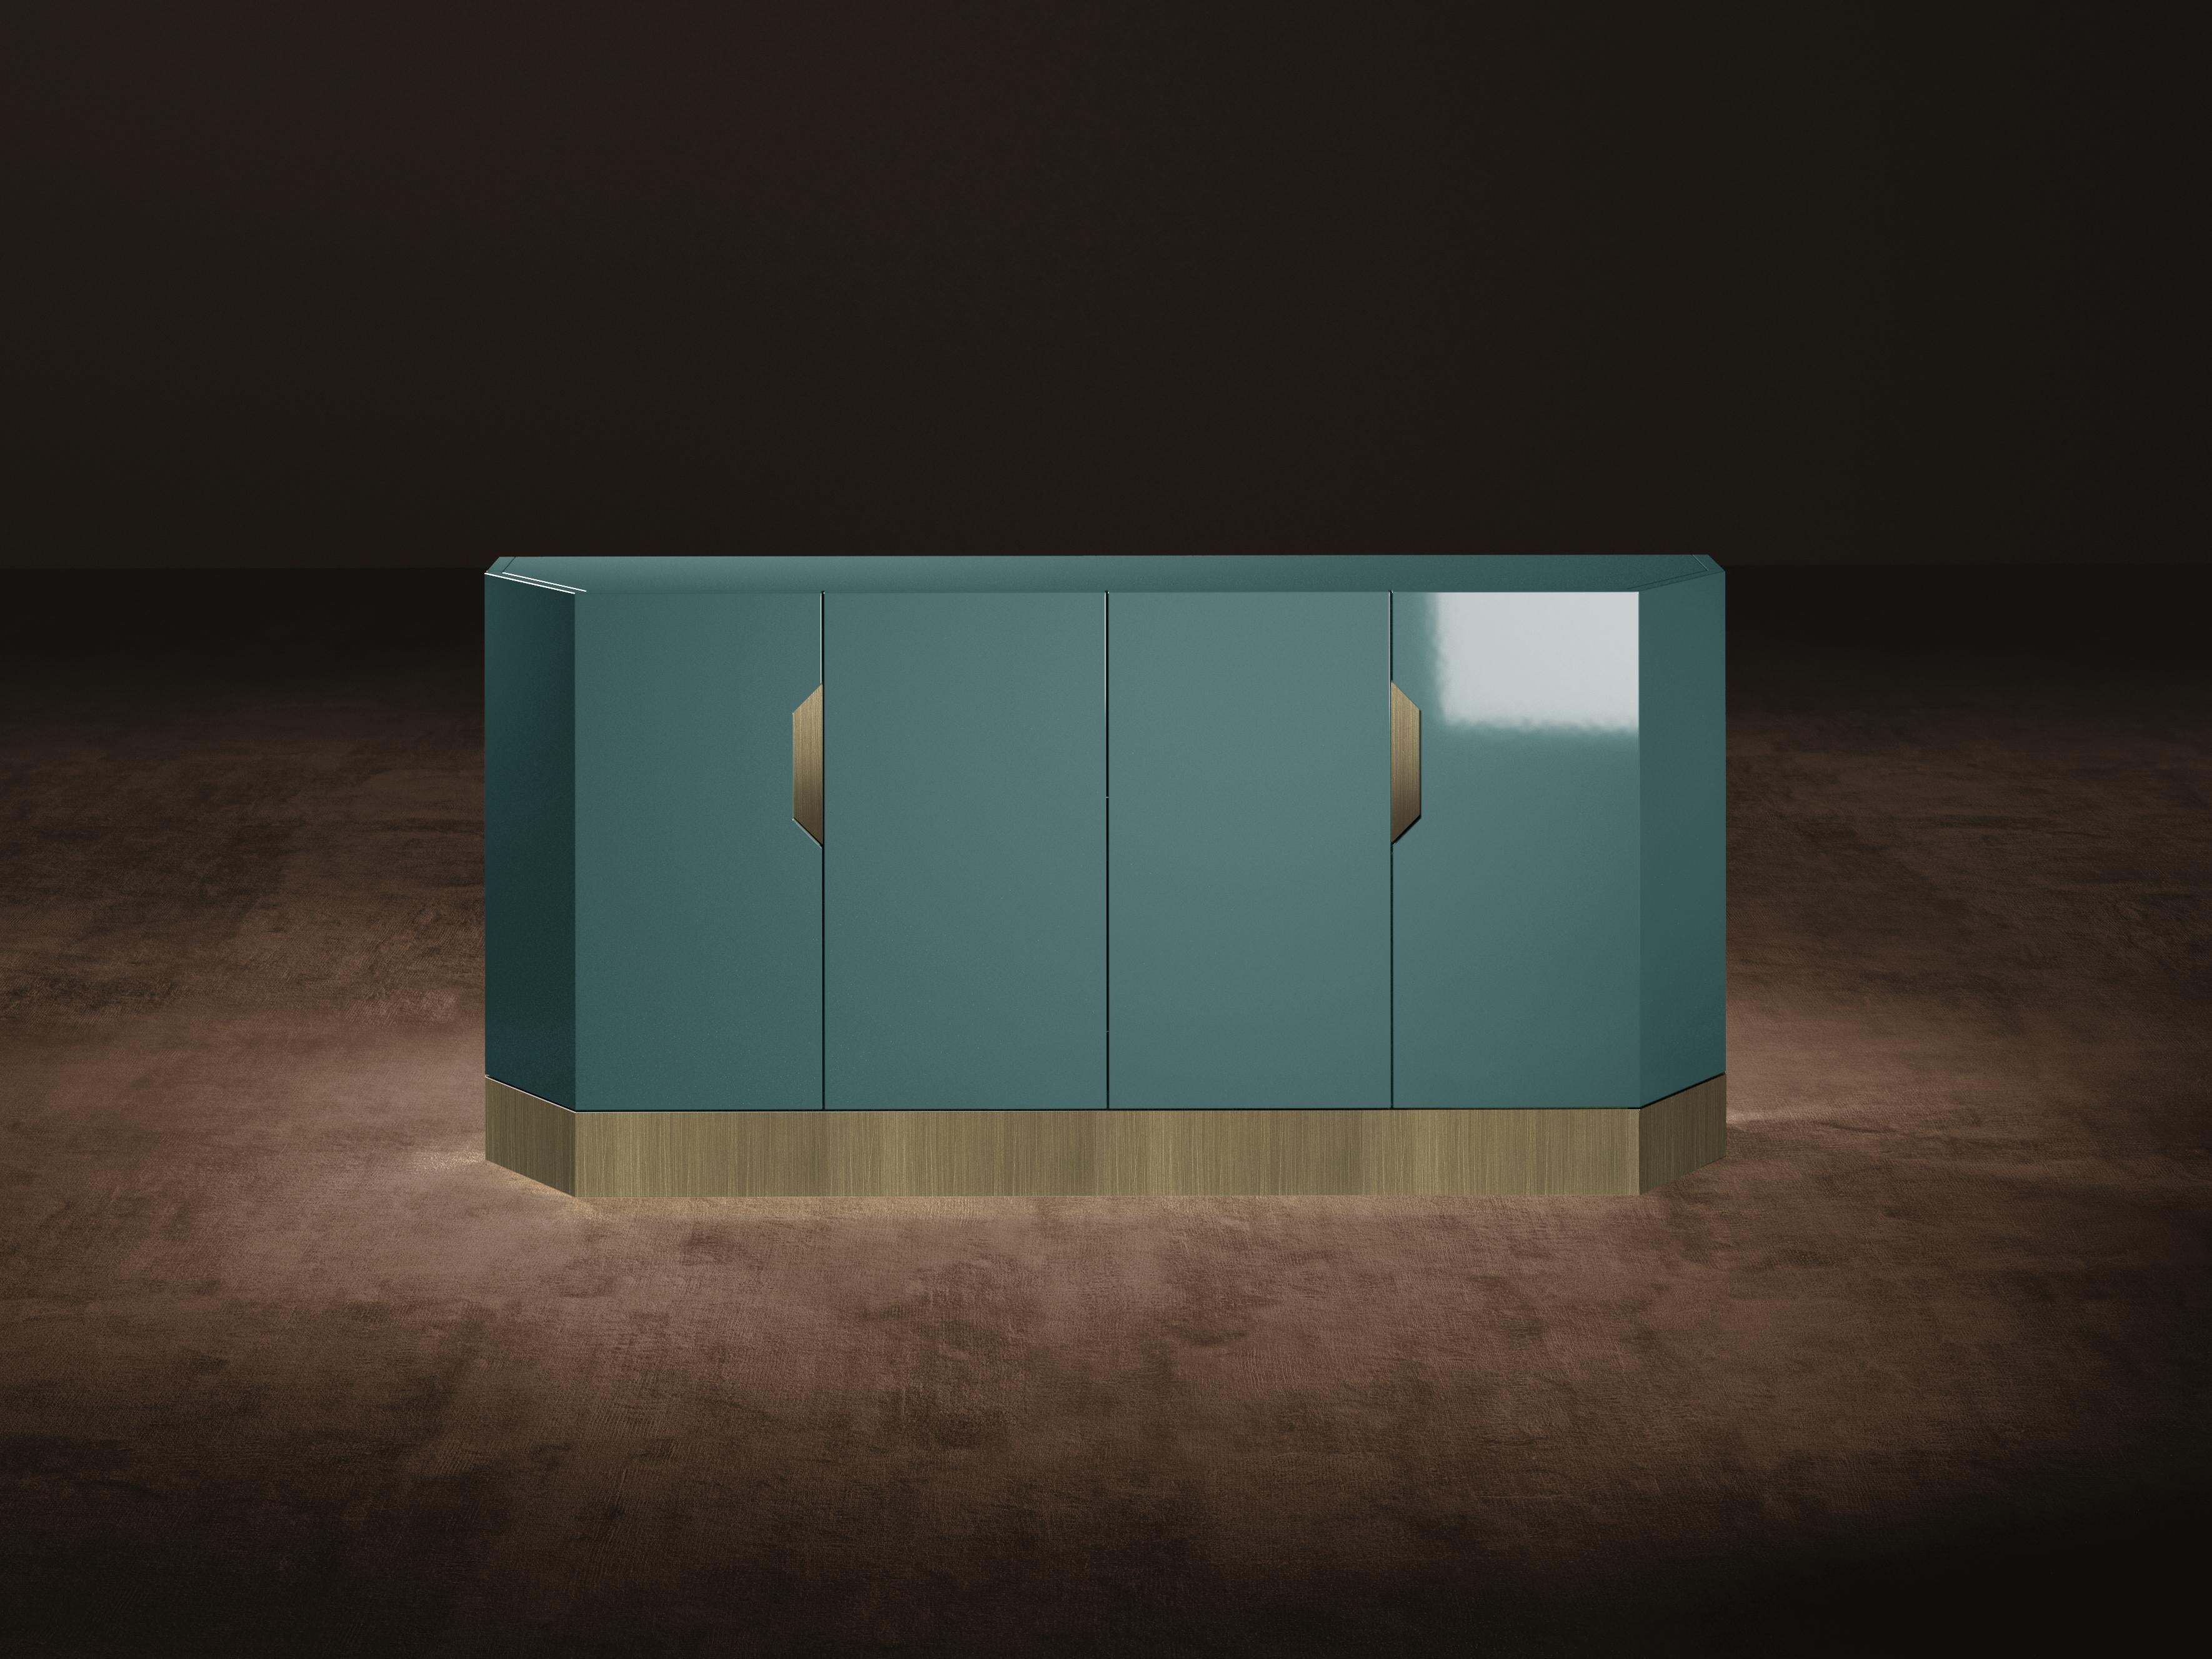 Senza fine sideboard is part of the Senza fine Capsule collection.
Senza fine sideboard is a doors cabinet with a wooden structure. The container, of hexagonal shape, has four front doors in lacquered wood with metal pockets for opening in the two